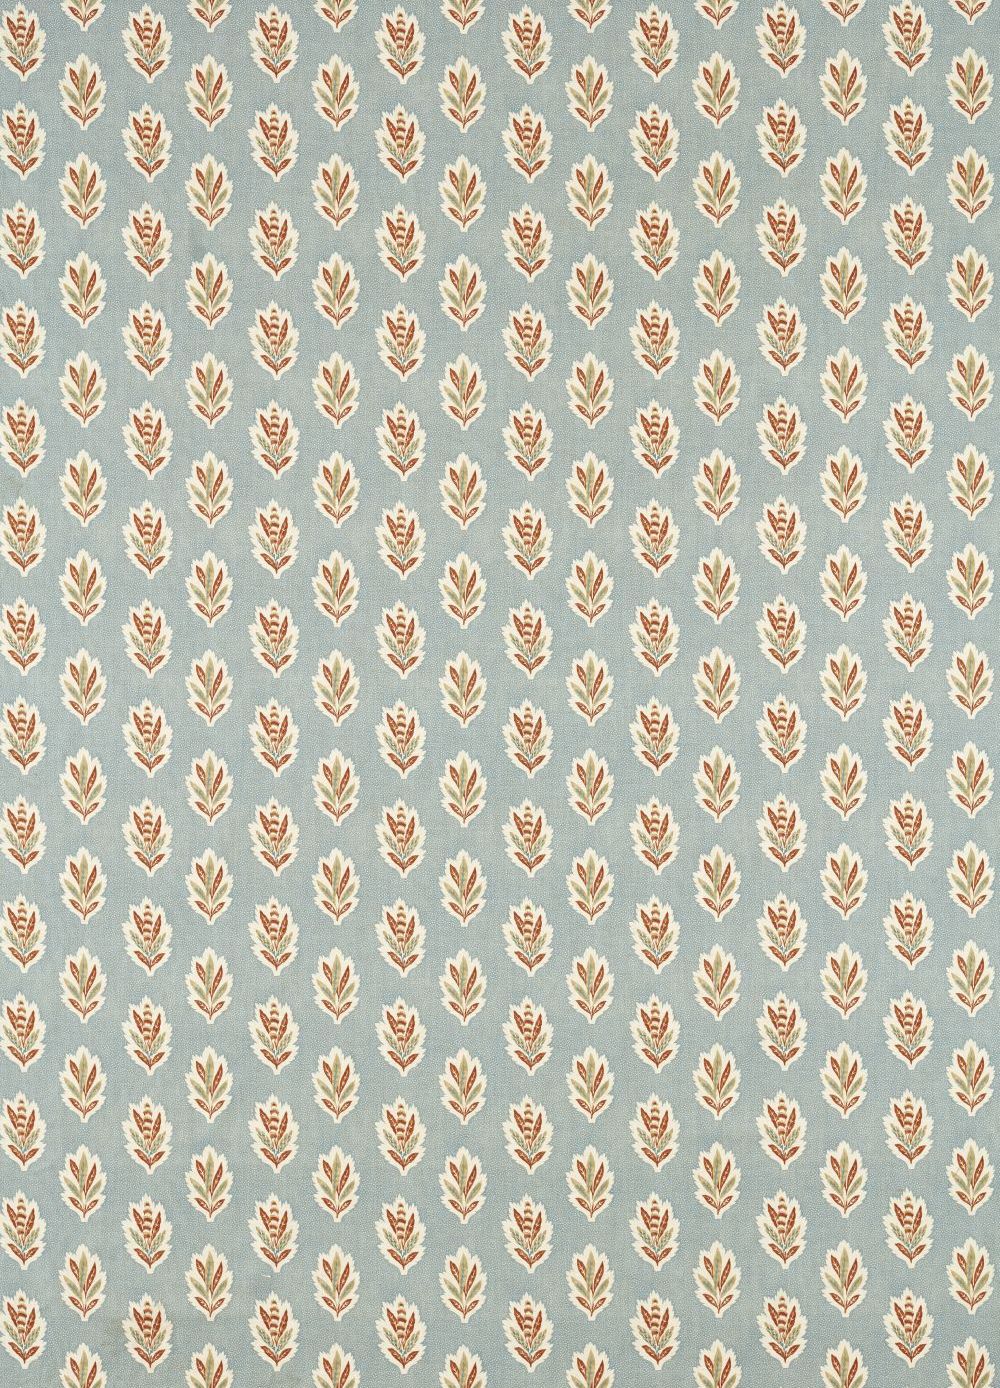 Sessile Leaf Fabric - Blue Clay - by Sanderson